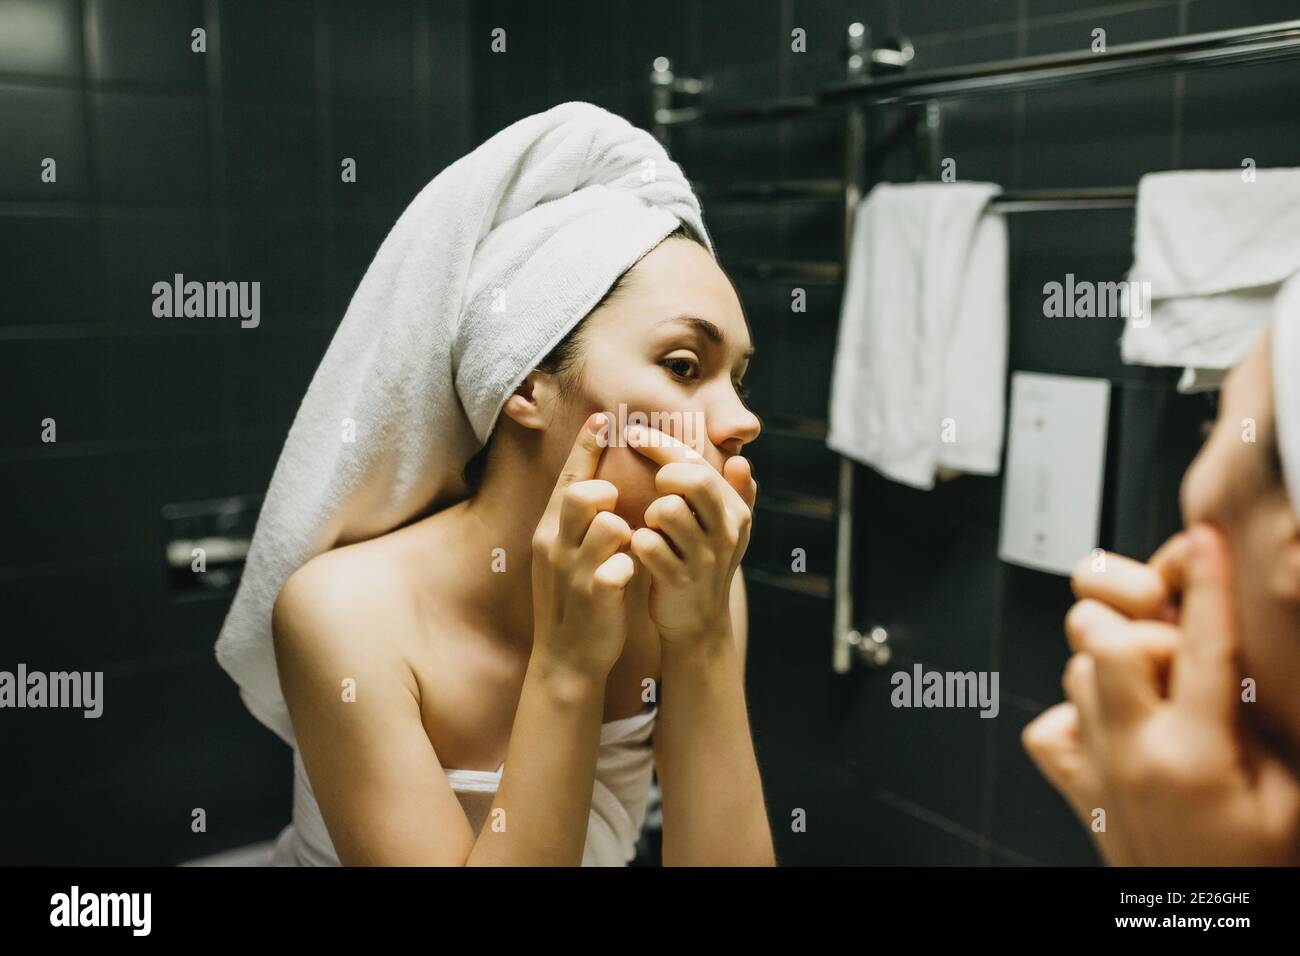 The girl presses pimples in front of the bathroom mirror. Skin care. Stock Photo